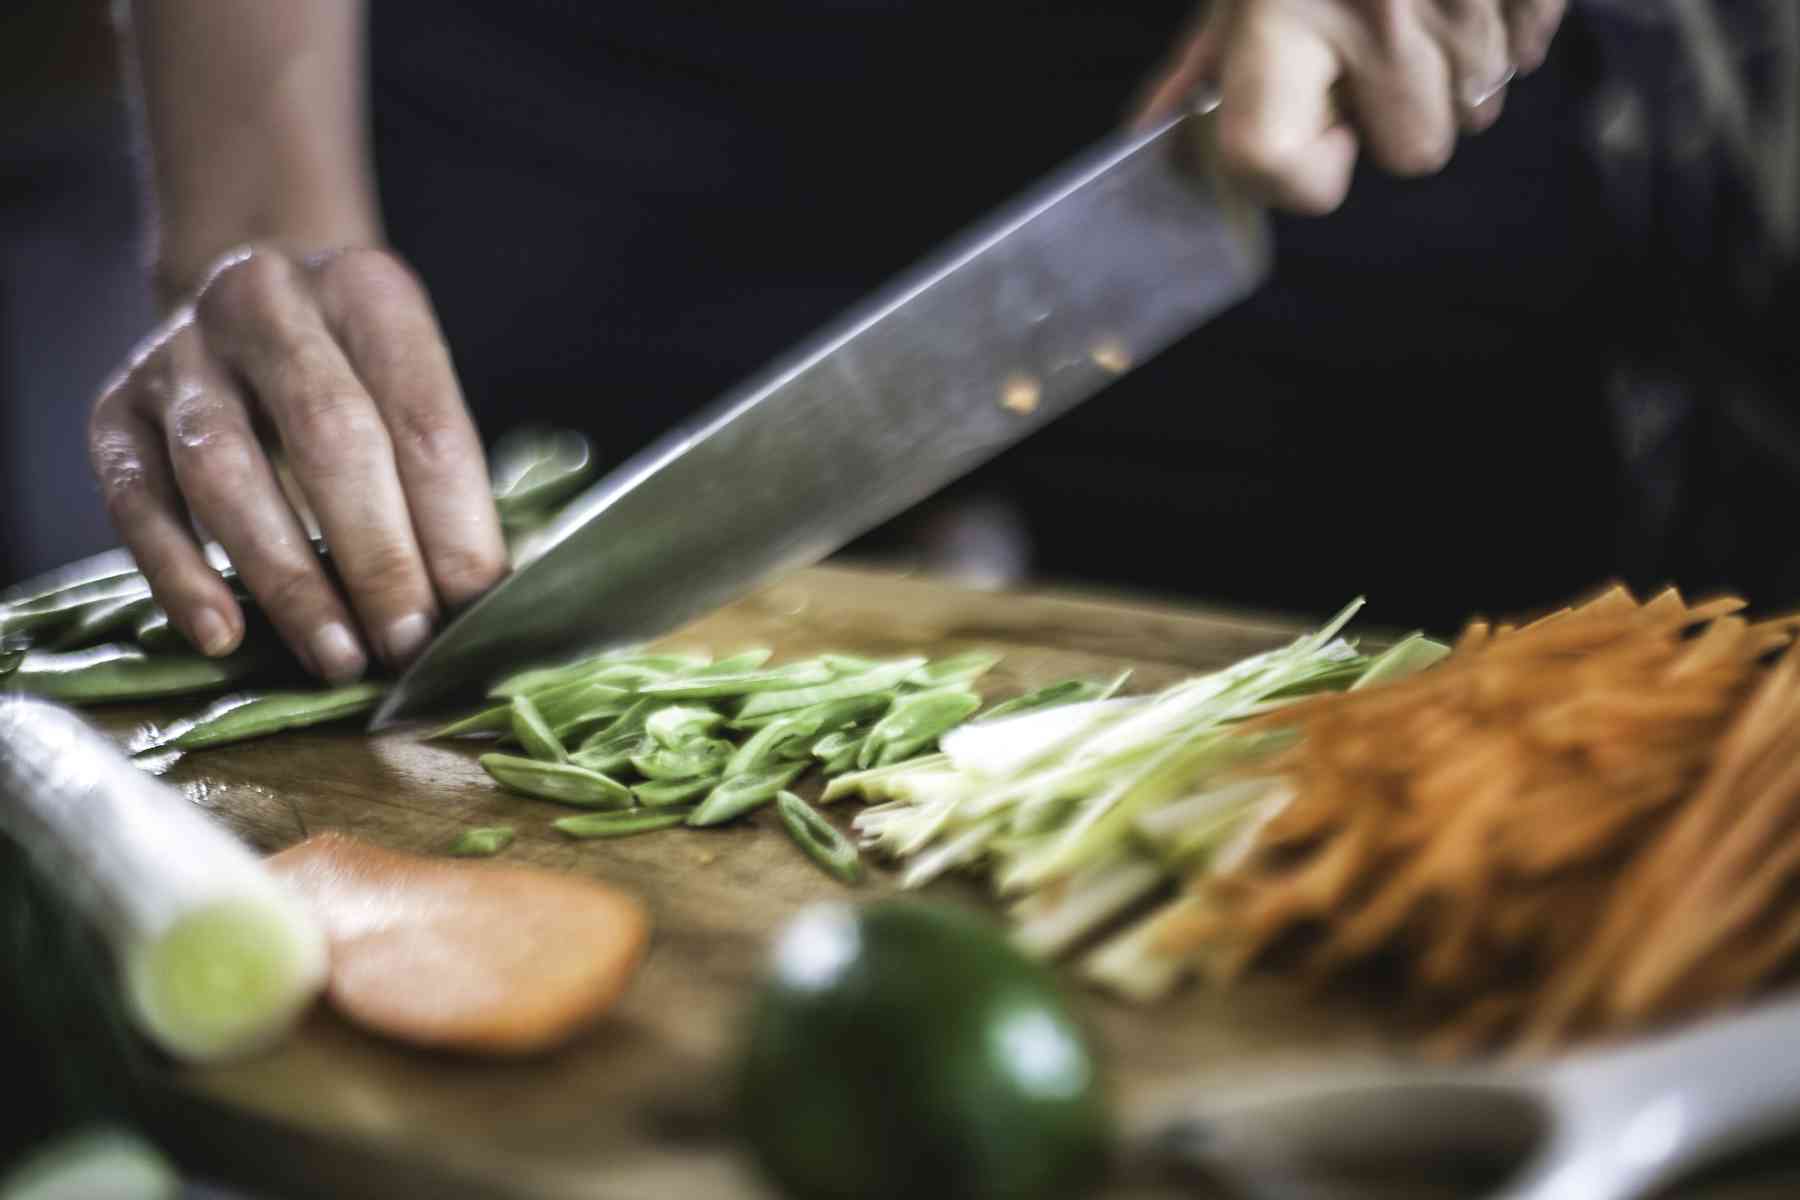 Cut vegetables. Cook with Carving. Cook Cutting Vegetables in the Air. Slicing and dicing.